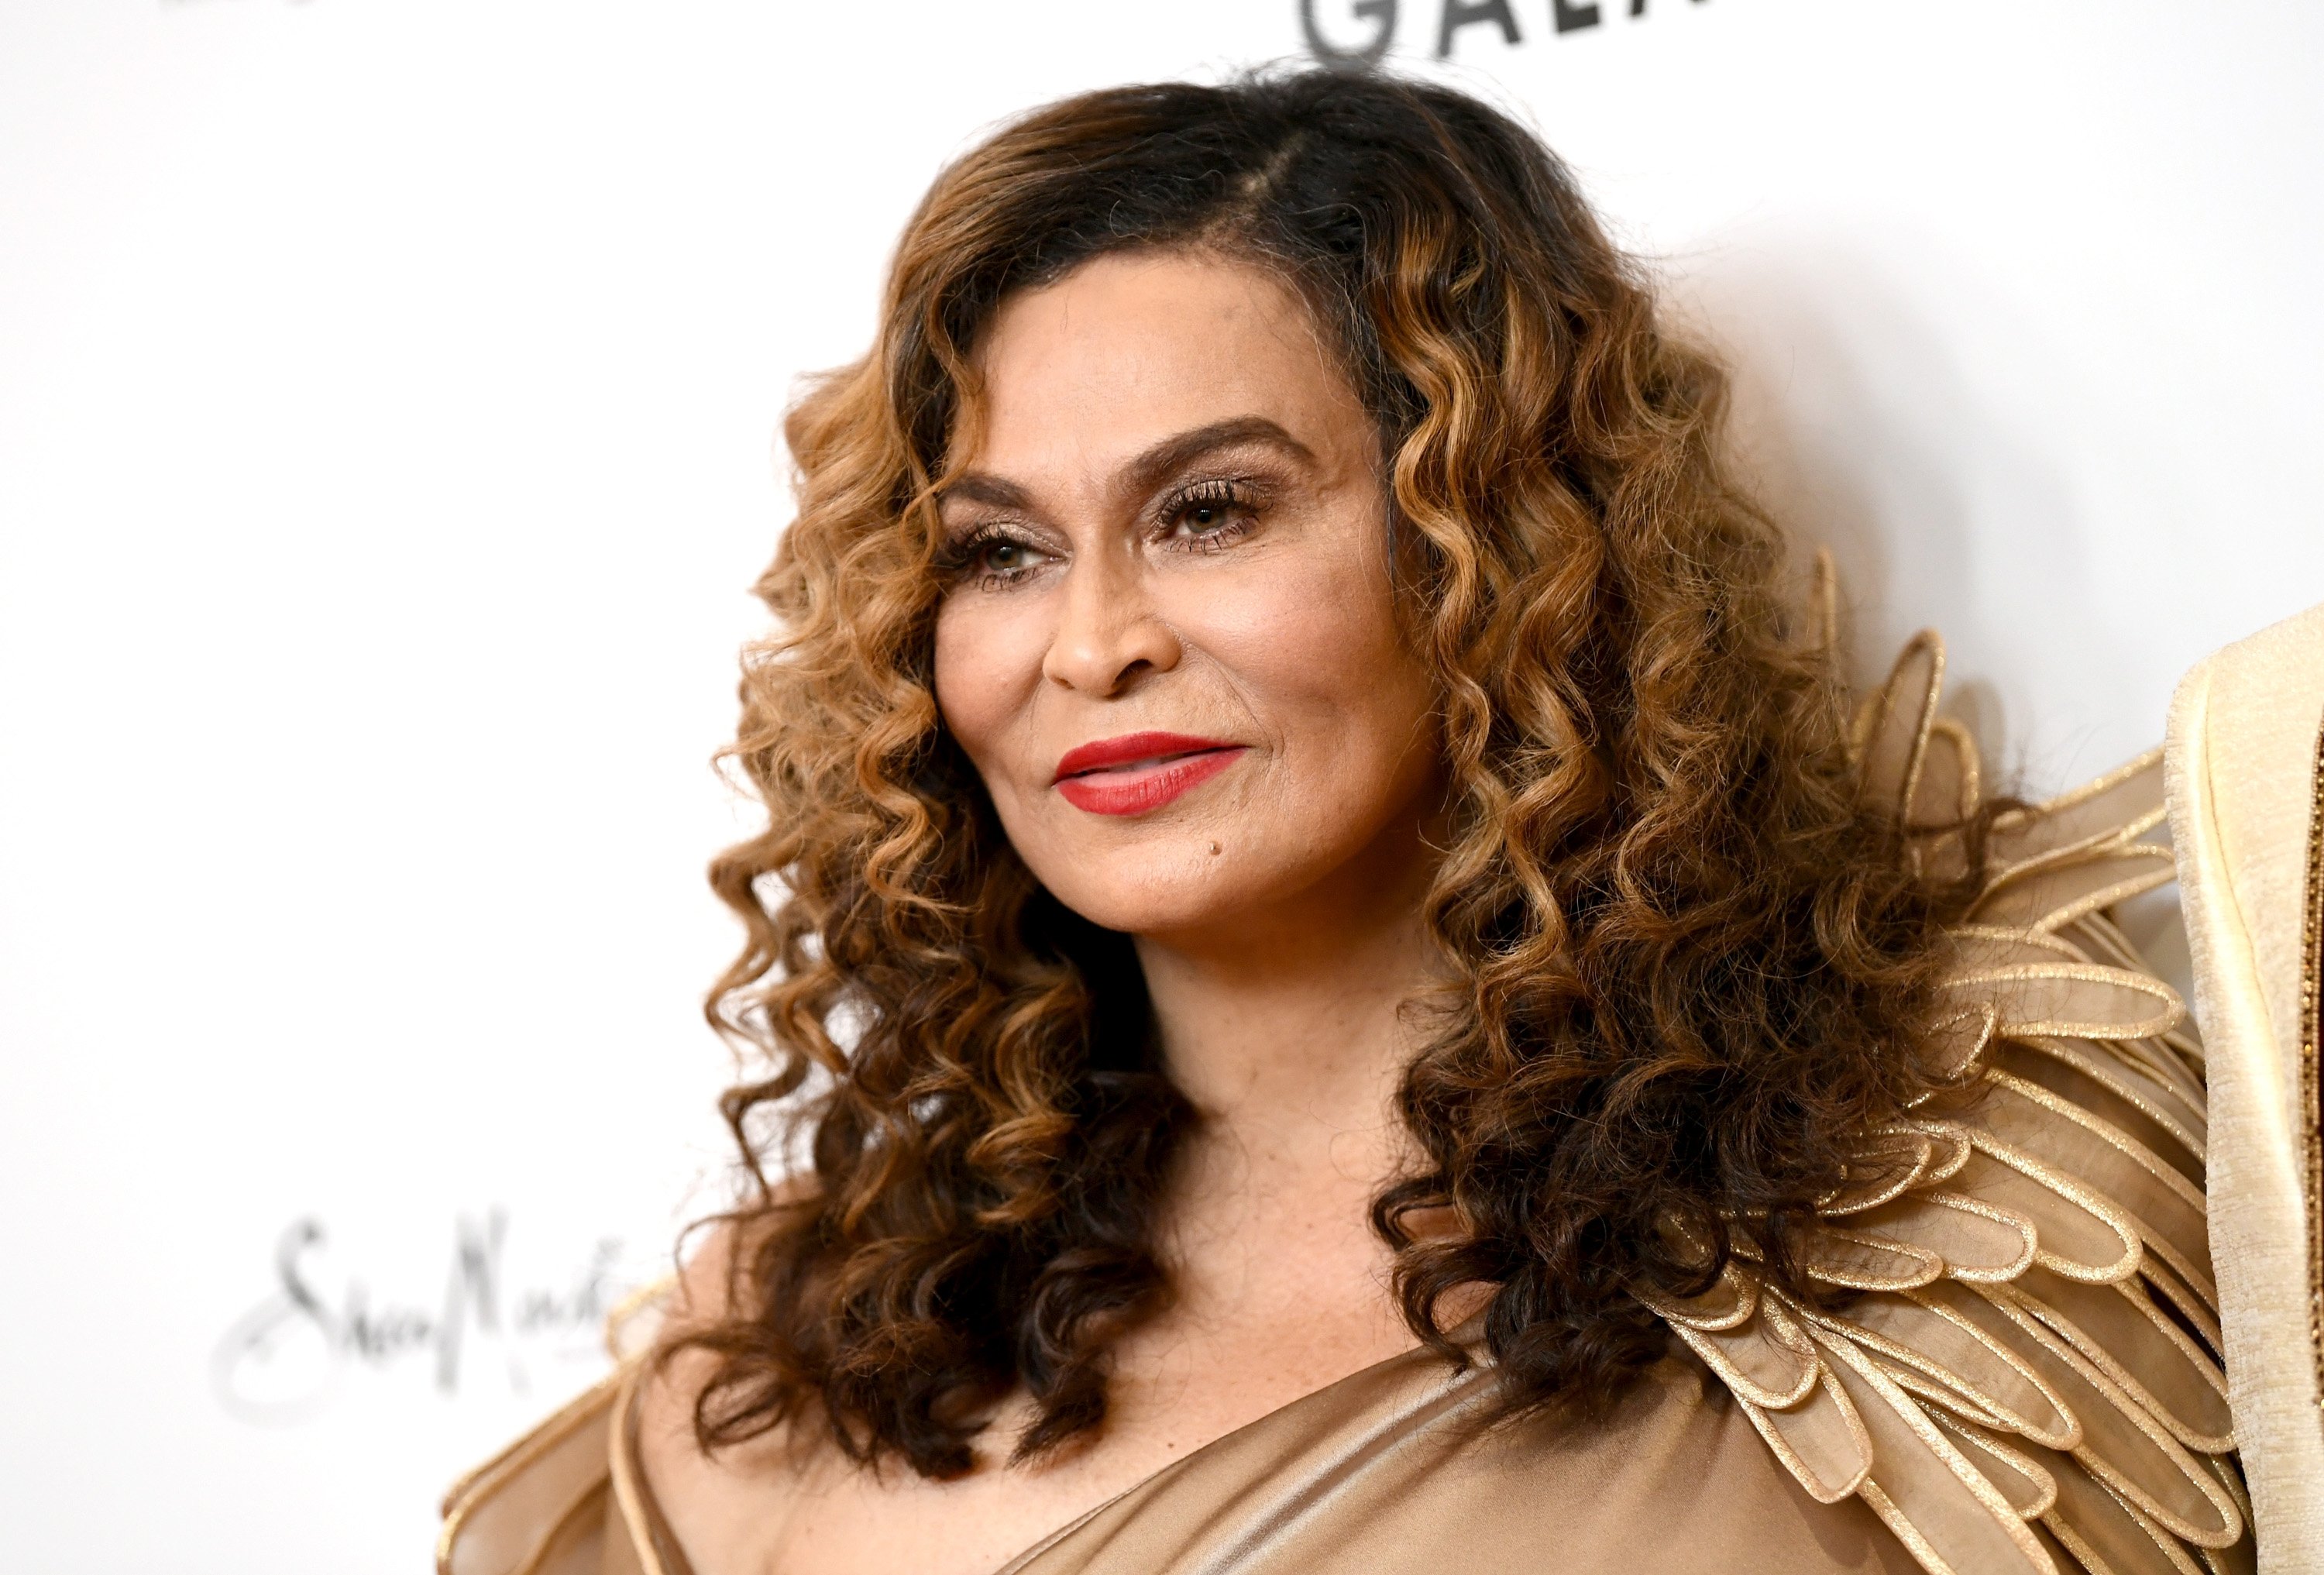 Tina Lawson at WACO Theatre's 2nd Annual Wearable Art Gala in March 2018. | Photo: Getty Images